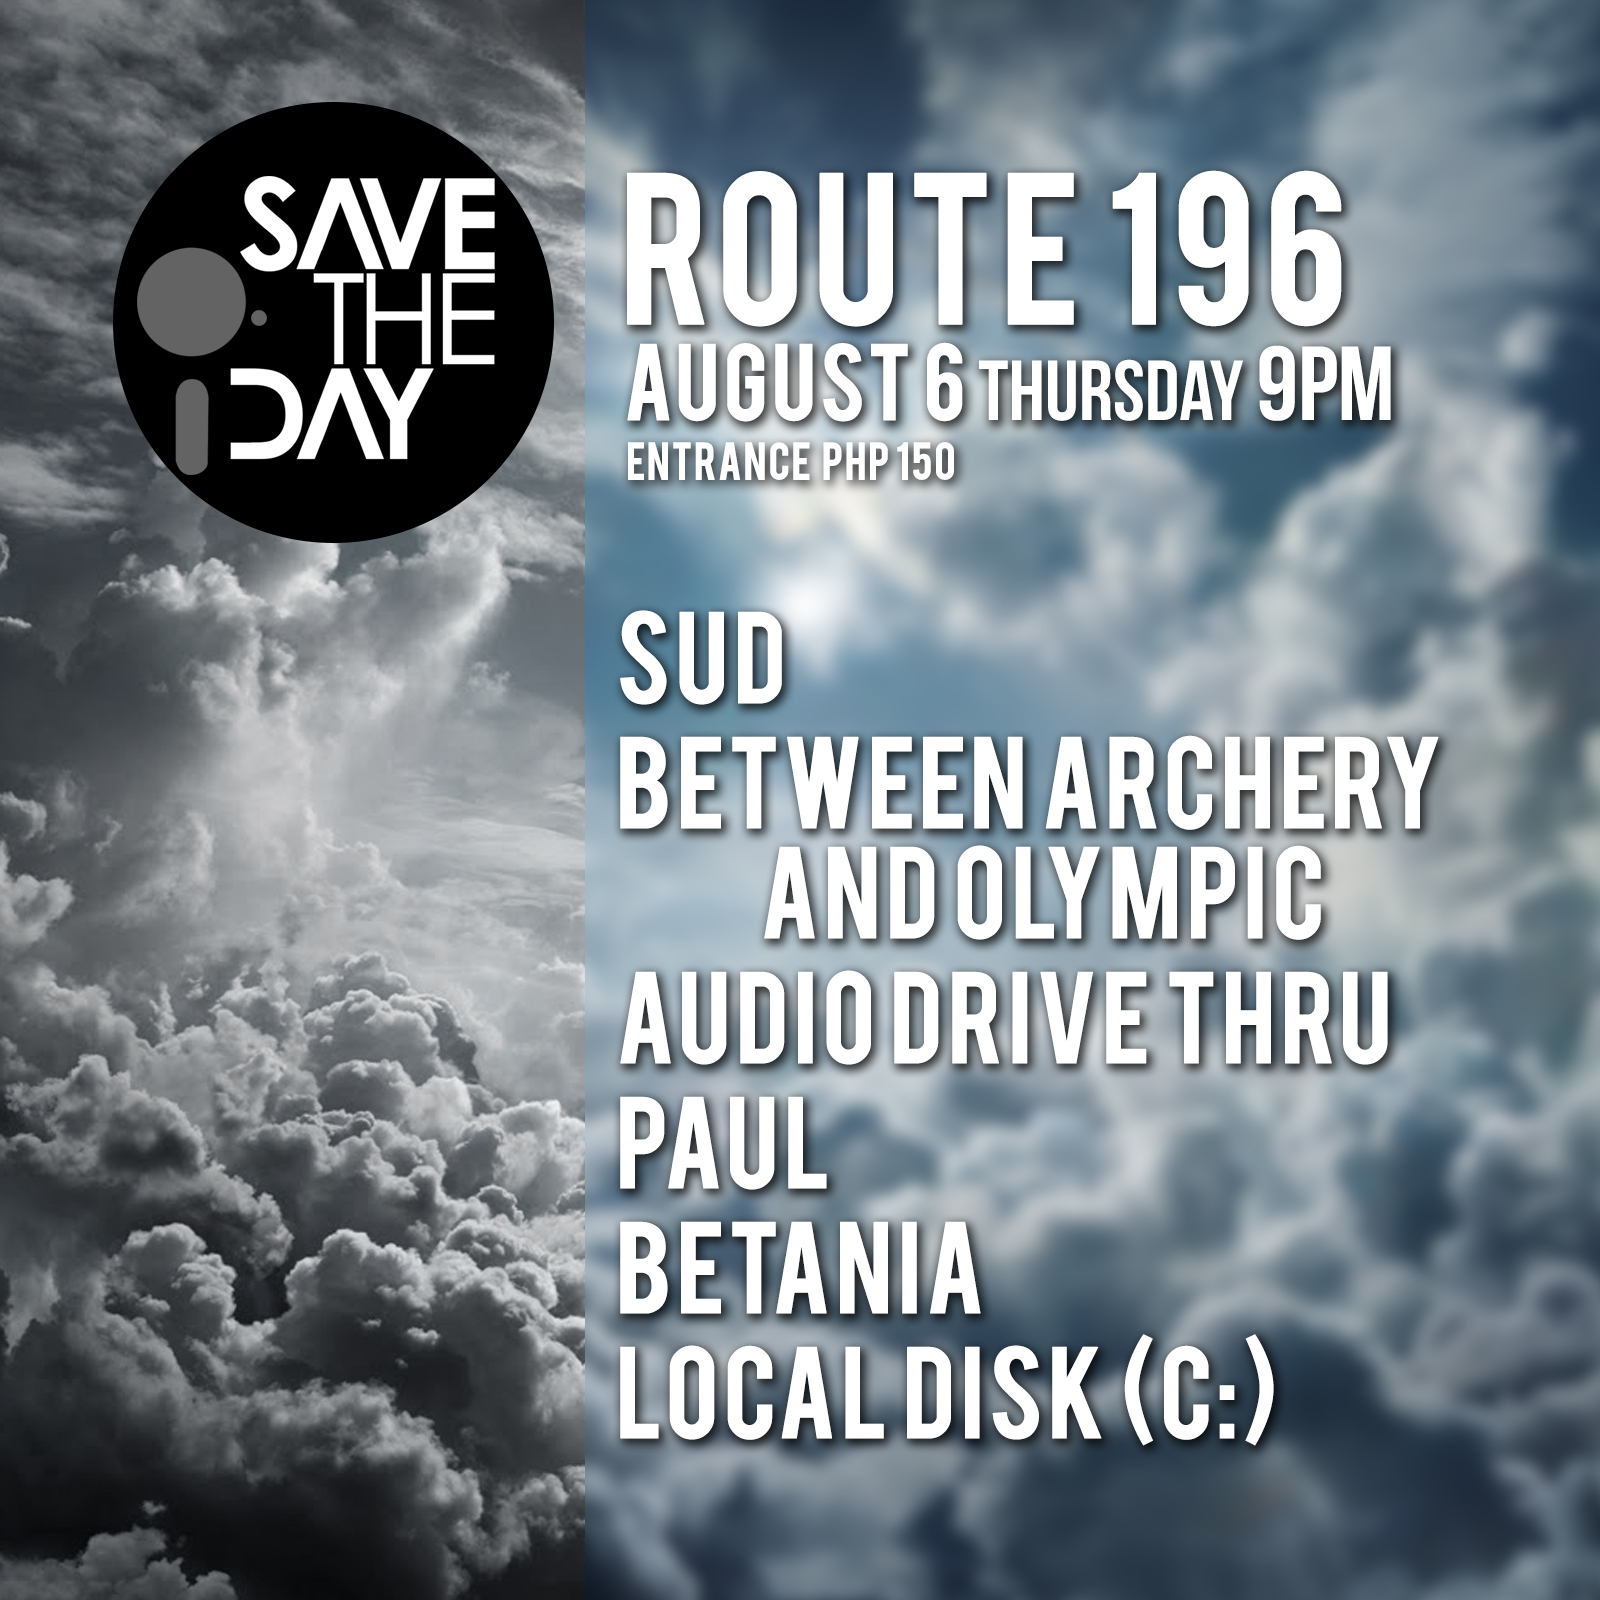 SAVE THE DAY     Thursday     at 8:30pm     2 days from now · 87°F / 76°F Chance of a Thunderstorm     	     Show Map     Route 196 Bar     196-A Katipunan Avenue Extension, Blue Ridge A, Quezon City, Philippines Save The Day August 6 Thursday 9PM Route 196 Bar Entrance Php 150 Performances by: Sud Between Archery and Olympic Audio Drive Thru PAUL Betania Local Disk (C:)